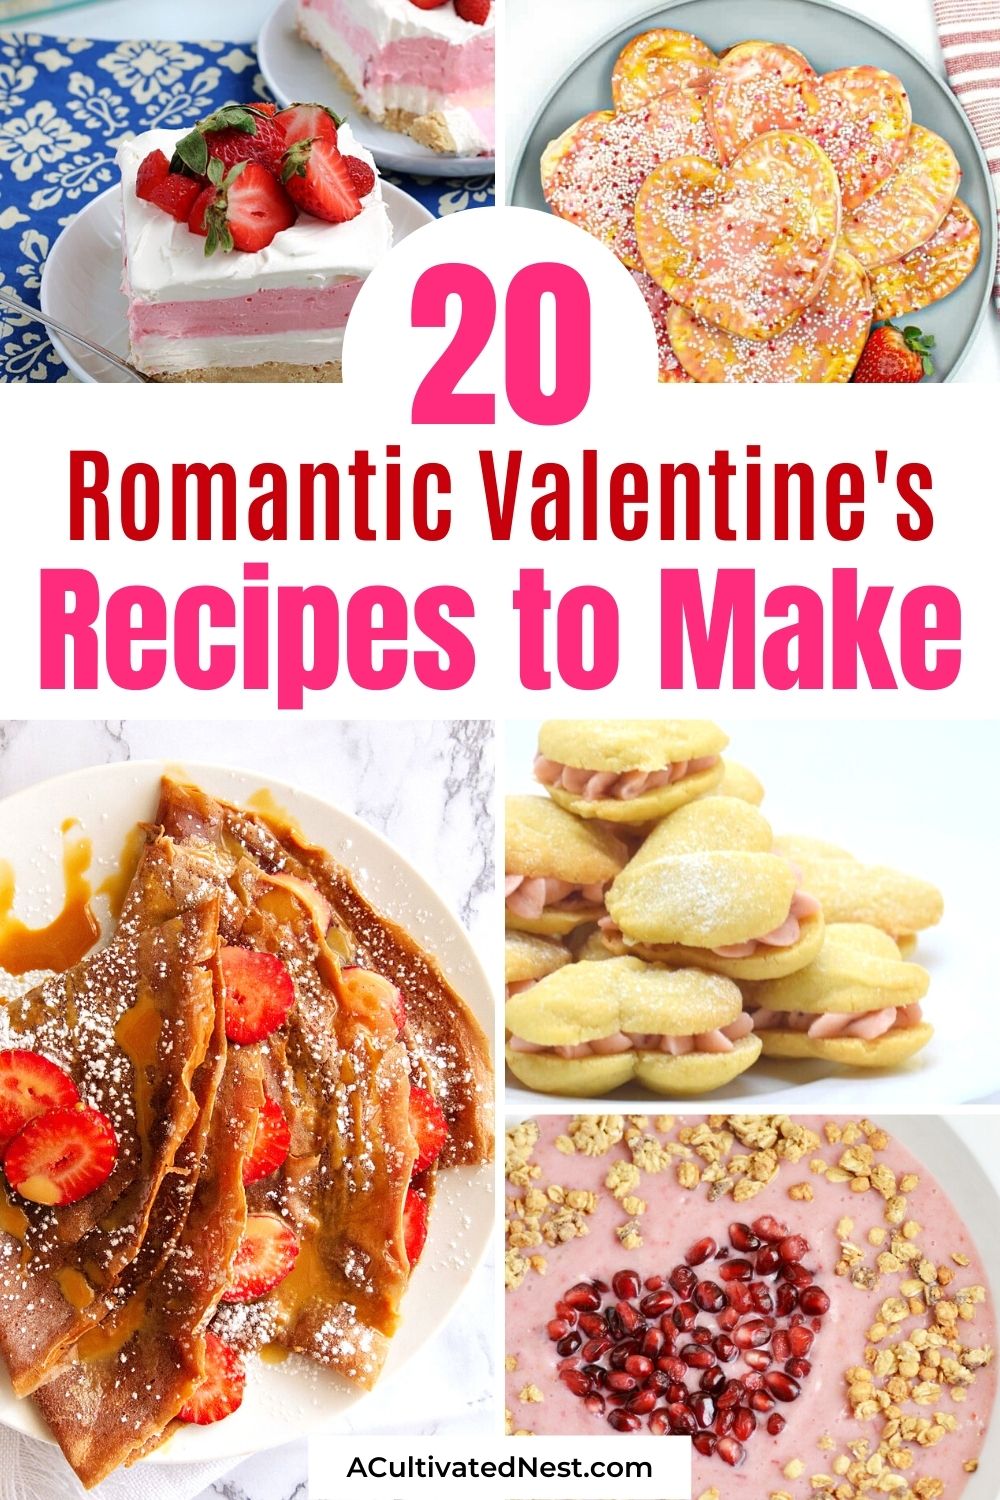 20 Romantic Valentine’s Day Recipes- If you want to serve a lovely meal this Valentine's Day, then you should include some of these delicious and romantic Valentine's Day recipes! | Valentine's Day desserts, Valentine's Day breakfasts, Valentine's Day dinner, #ValentinesDay #ValentinesDayRecipes #recipes #desserts #ACultivatedNest